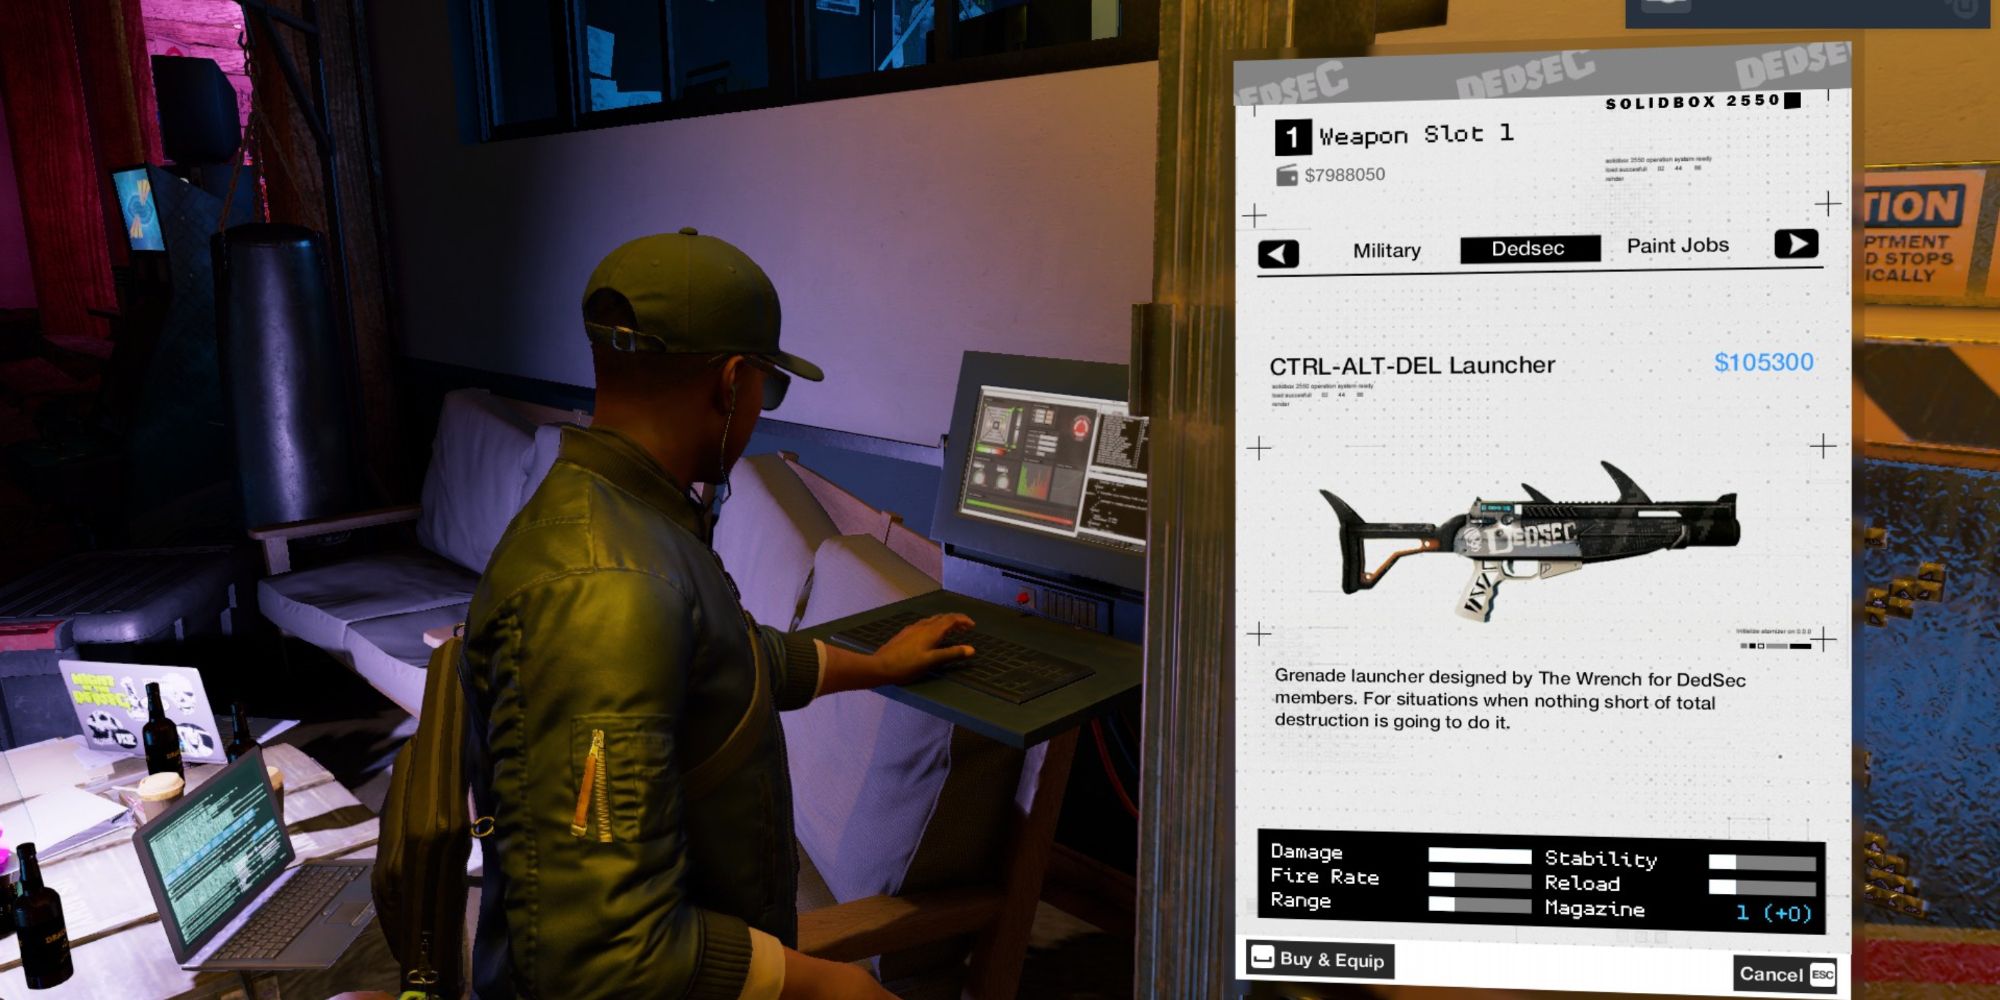 Watch Dogs 2 CTRL-ALT-DEL Launcher can take out a squad of vehicles with one shot